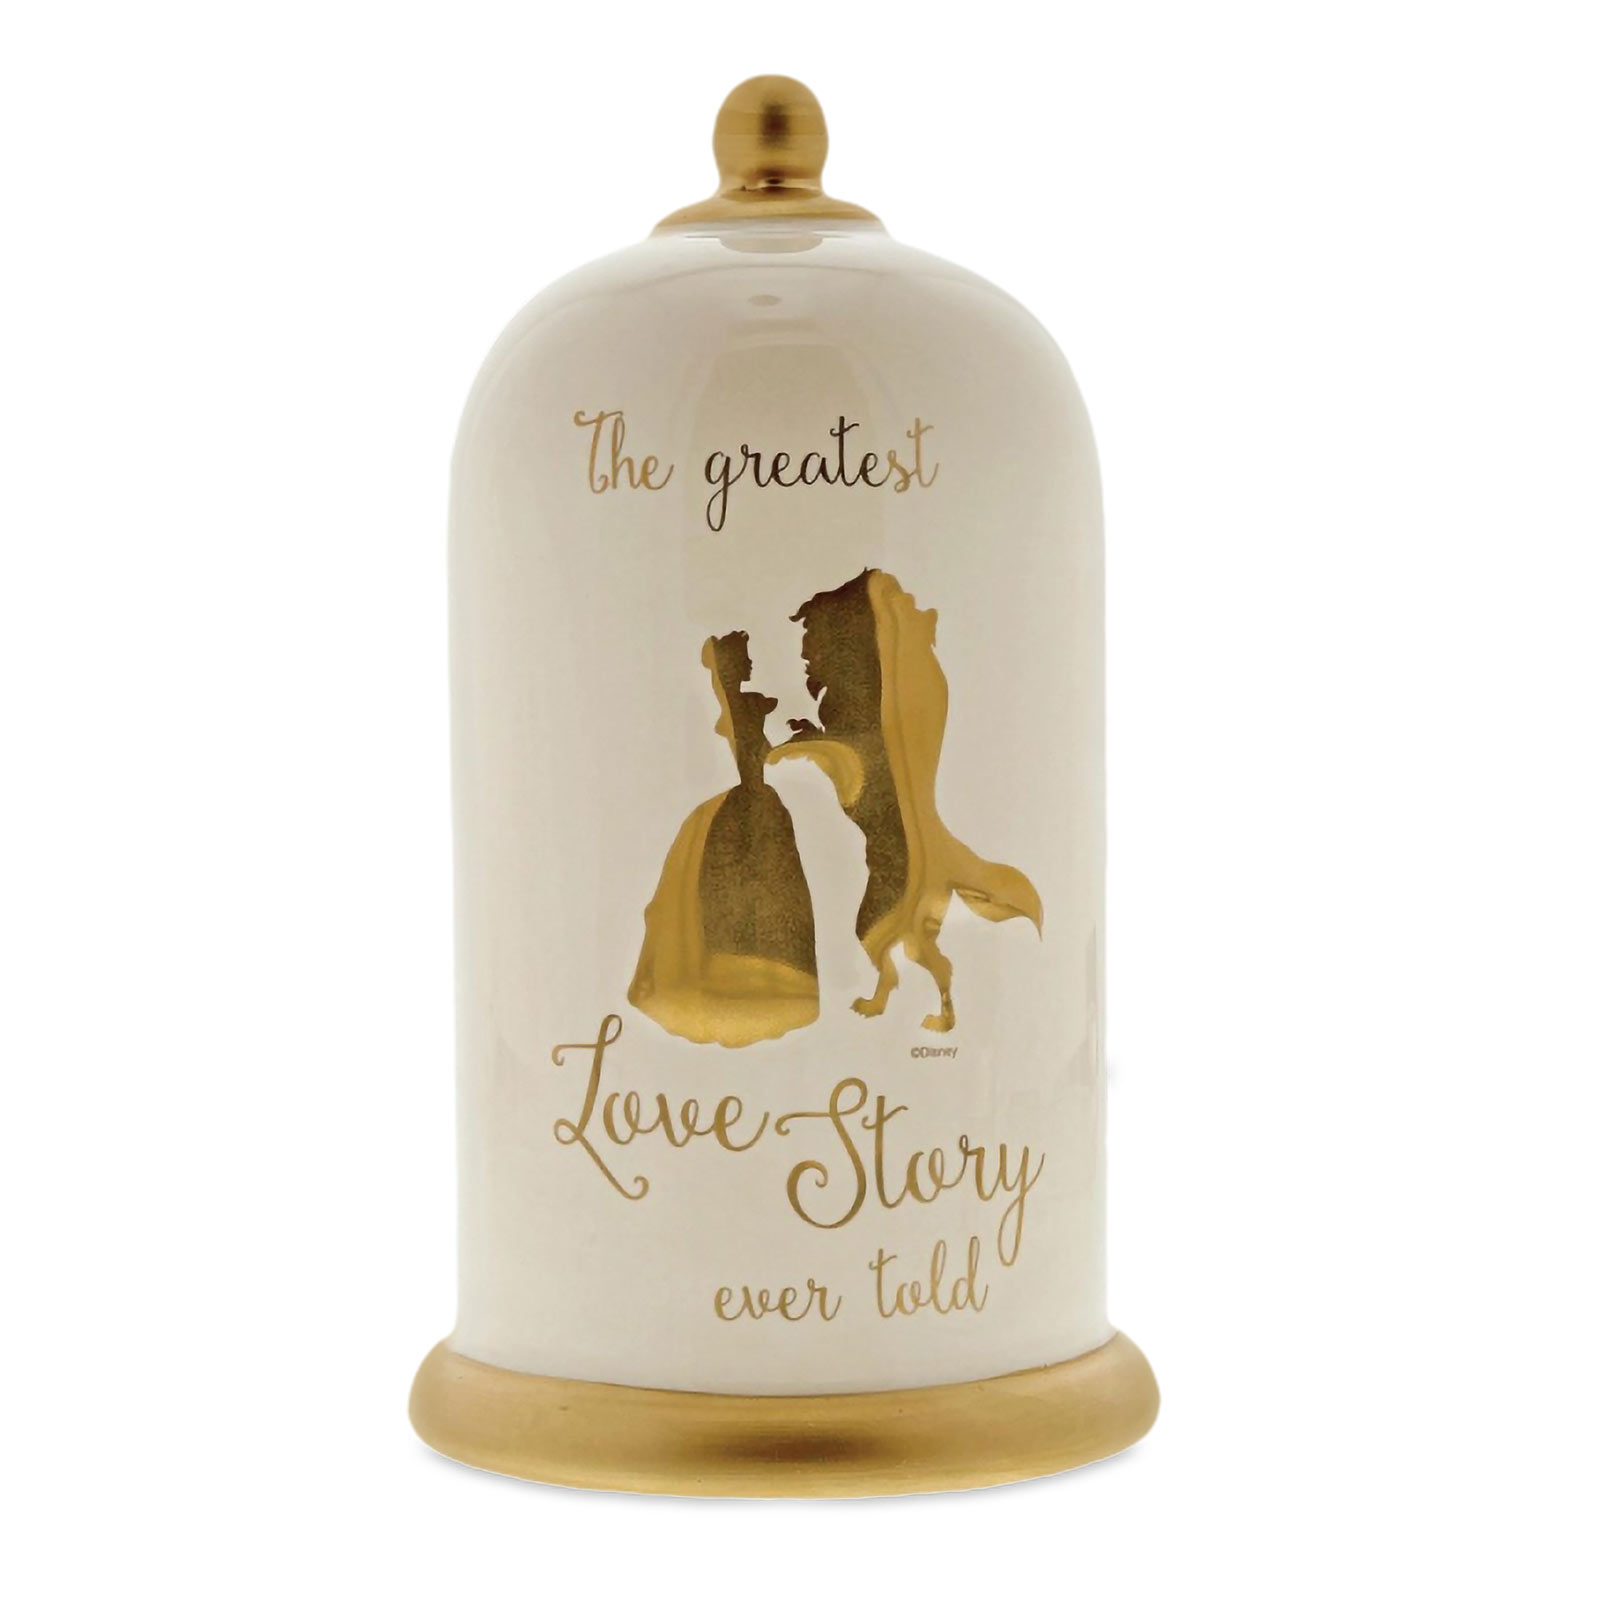 Beauty and the Beast - Enchanted Rose Money Box